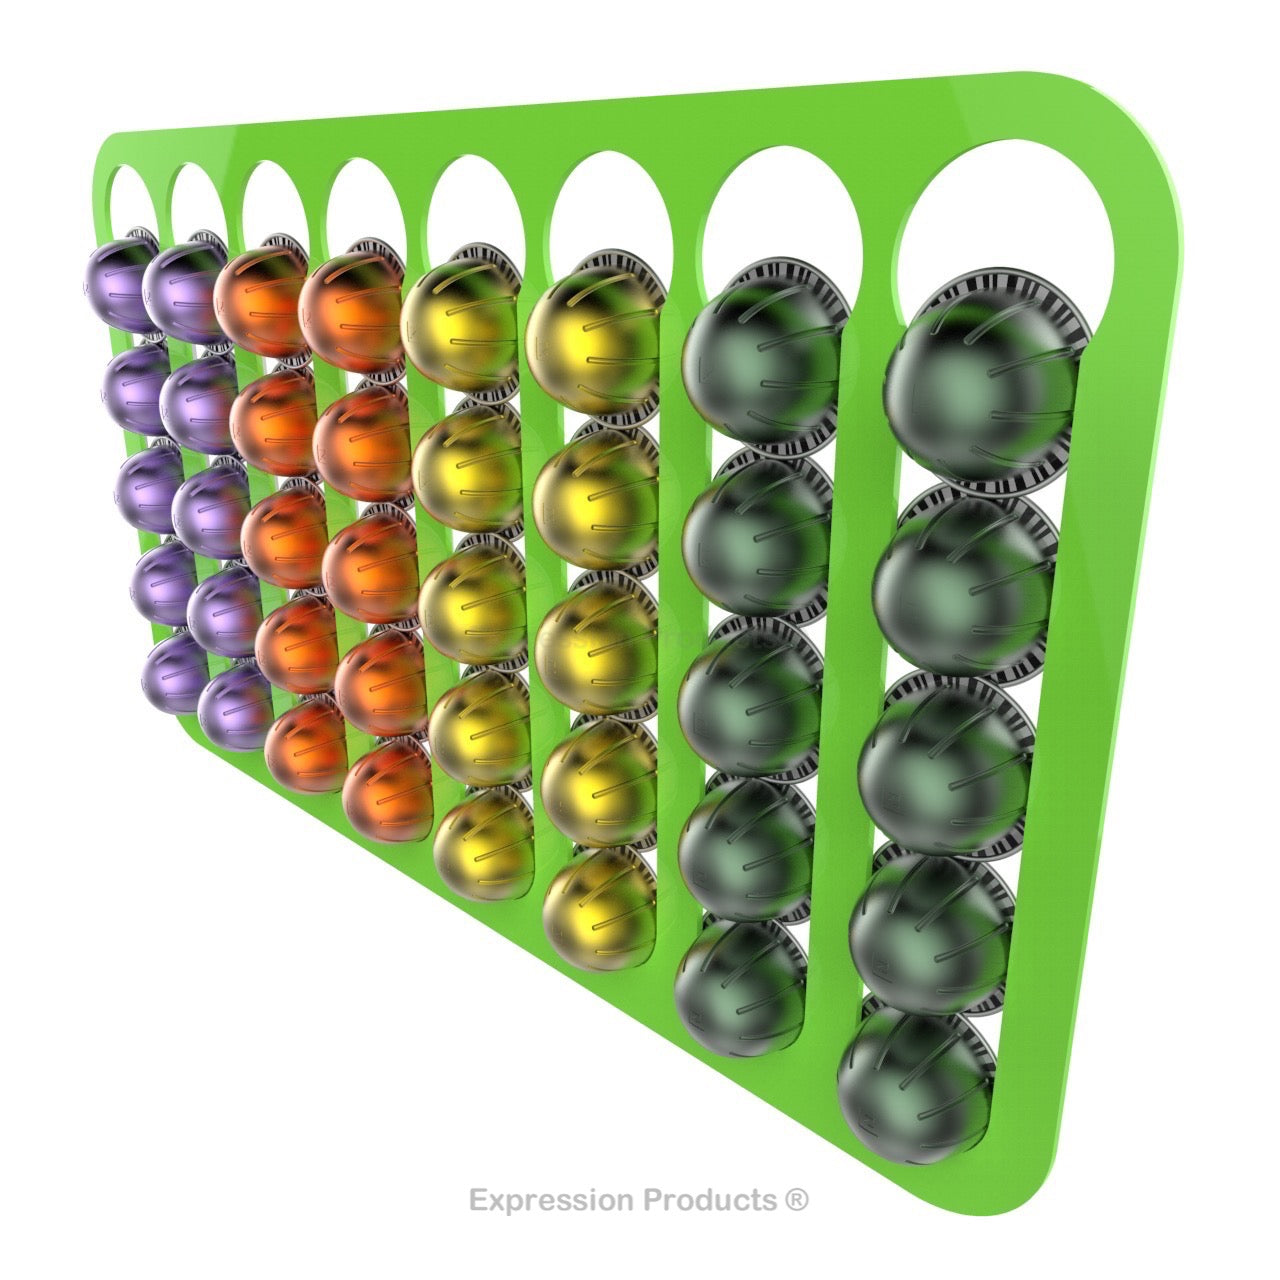 Magnetic Nespresso Vertuo capsule holder shown in lime holding 40 pods